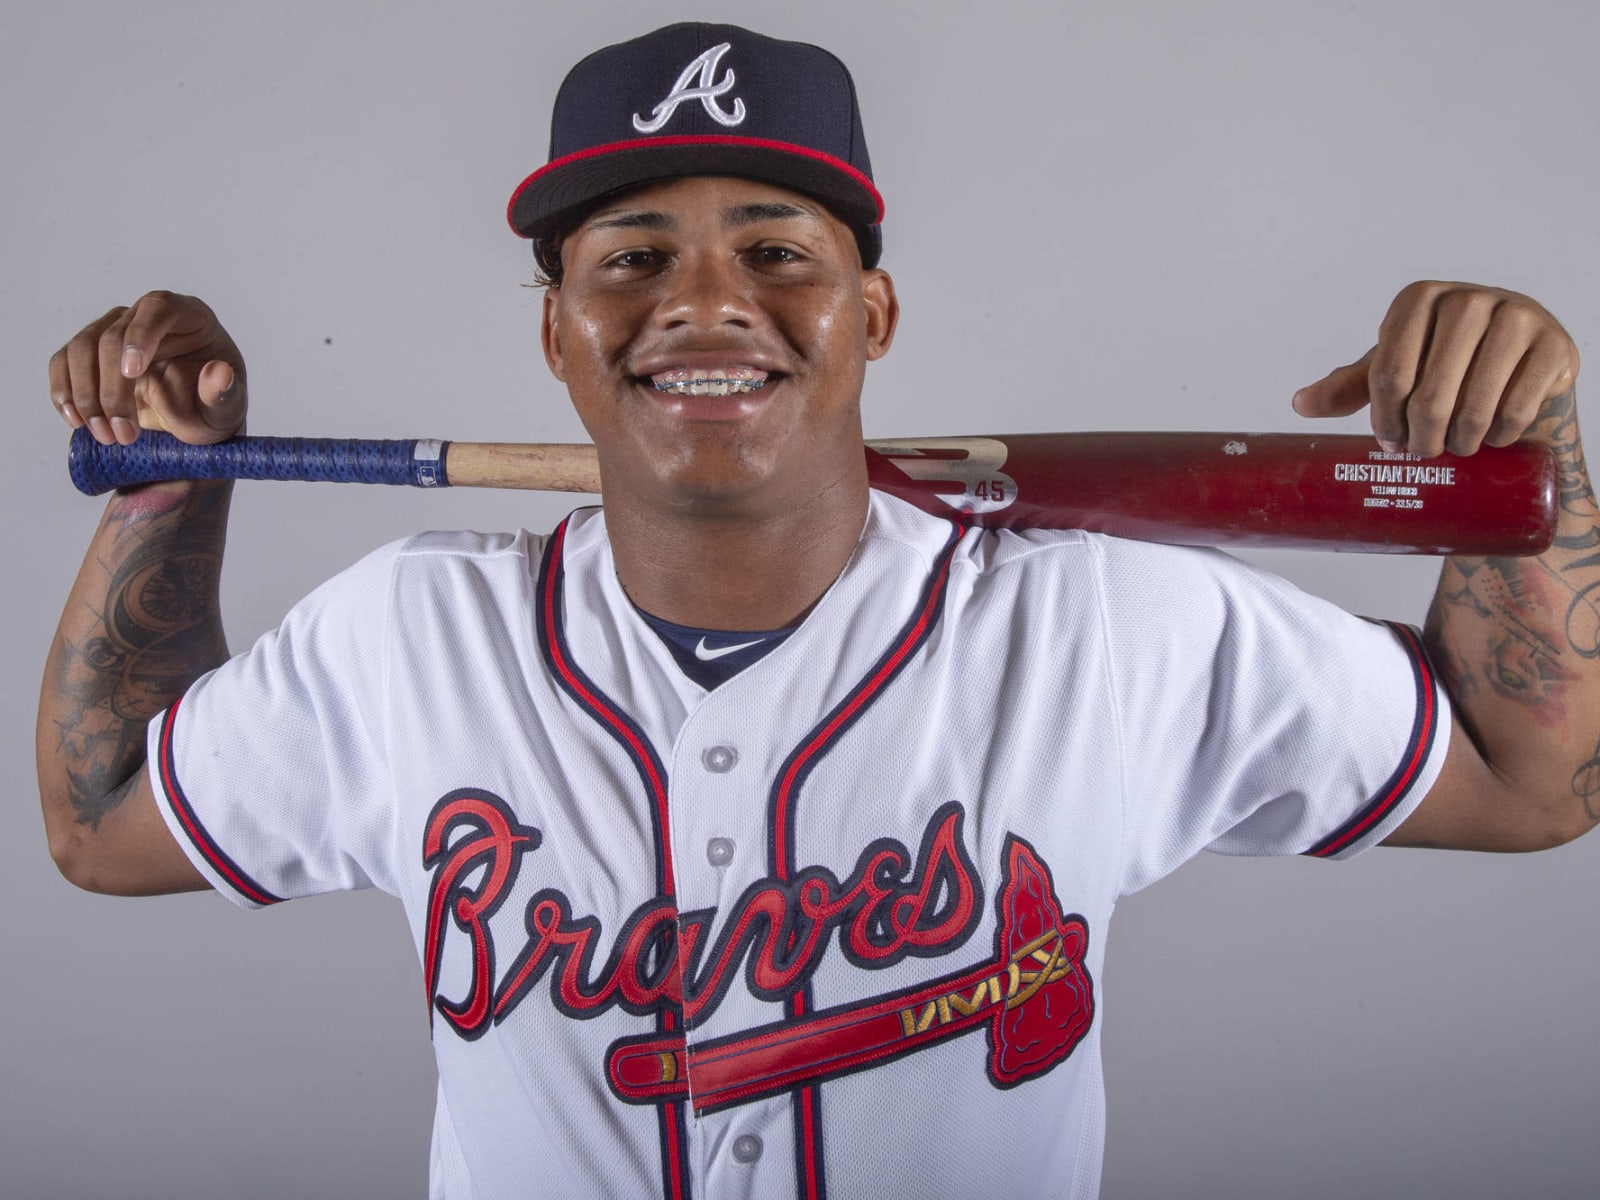 CRISTIAN PACHE IS BACK!! THE BRAVES ROOKIE CENTERFIELDER RETURNS WITH A  GRAND-SLAM IN HIS FIRST AT-BAT! Braves lead 4-0! @cristianpache15